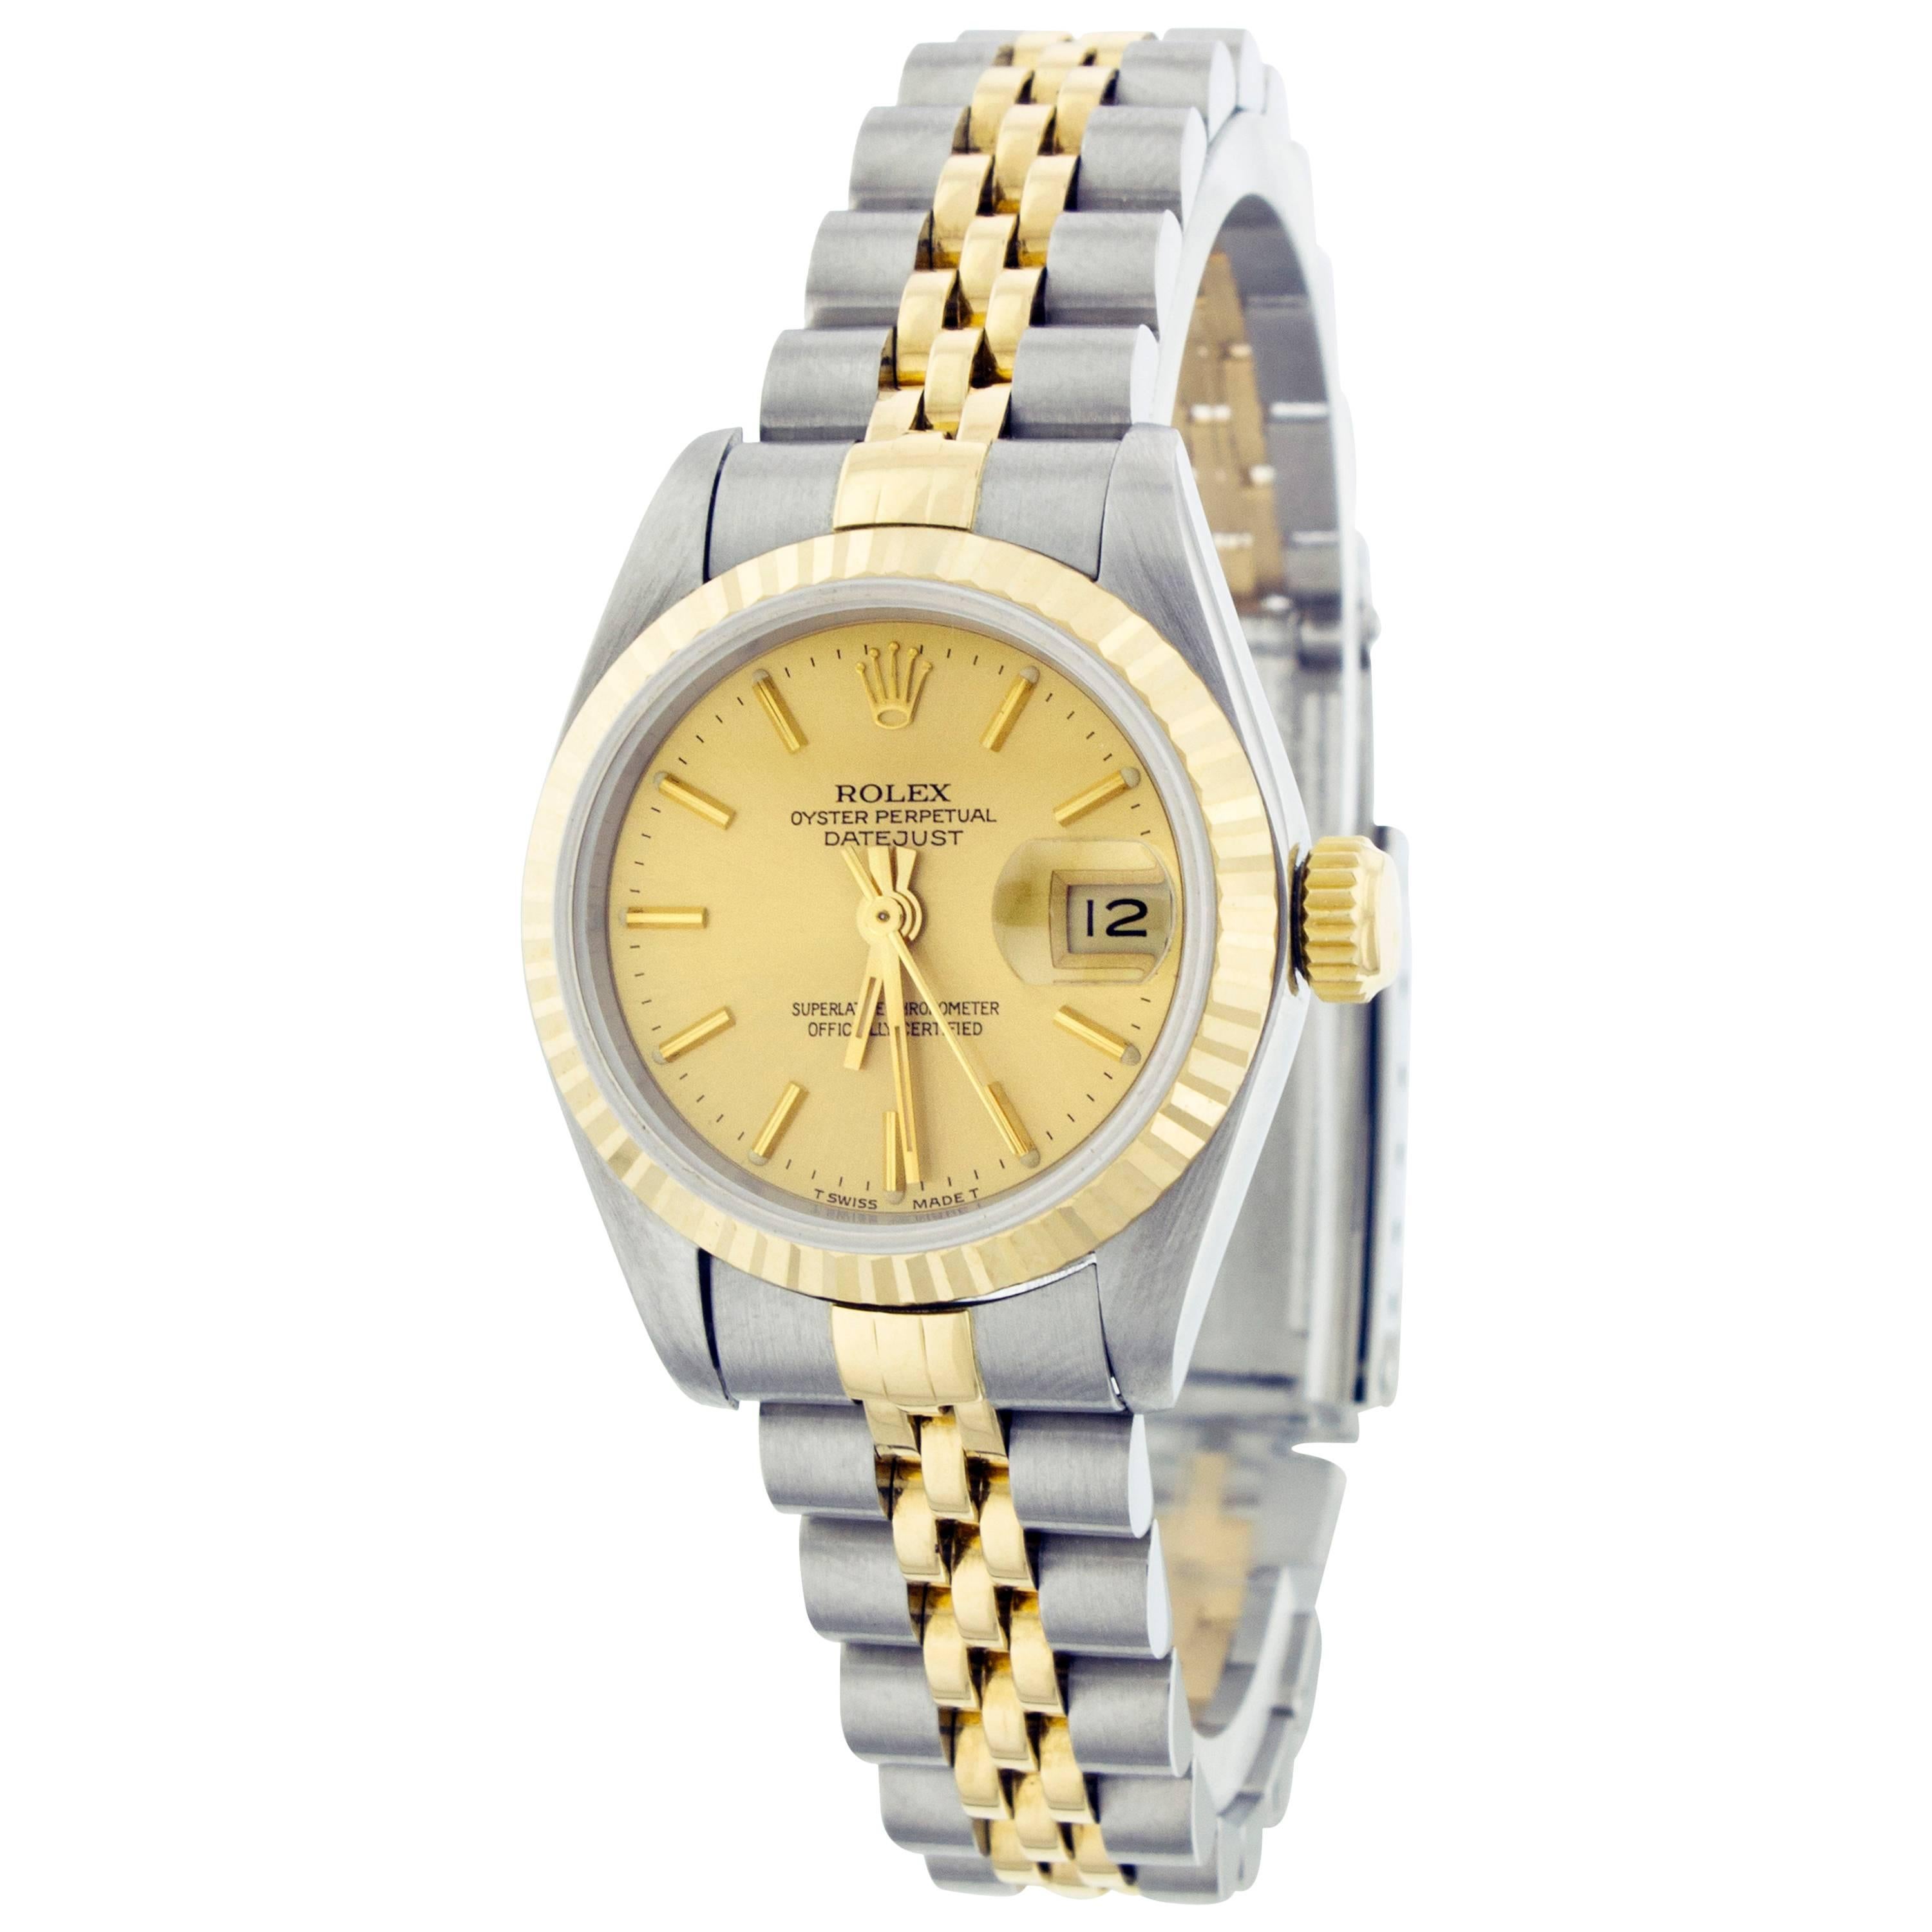 Rolex Lady's Yellow Gold Stainless Steel Datejust Wristwatch Ref 69173 For Sale